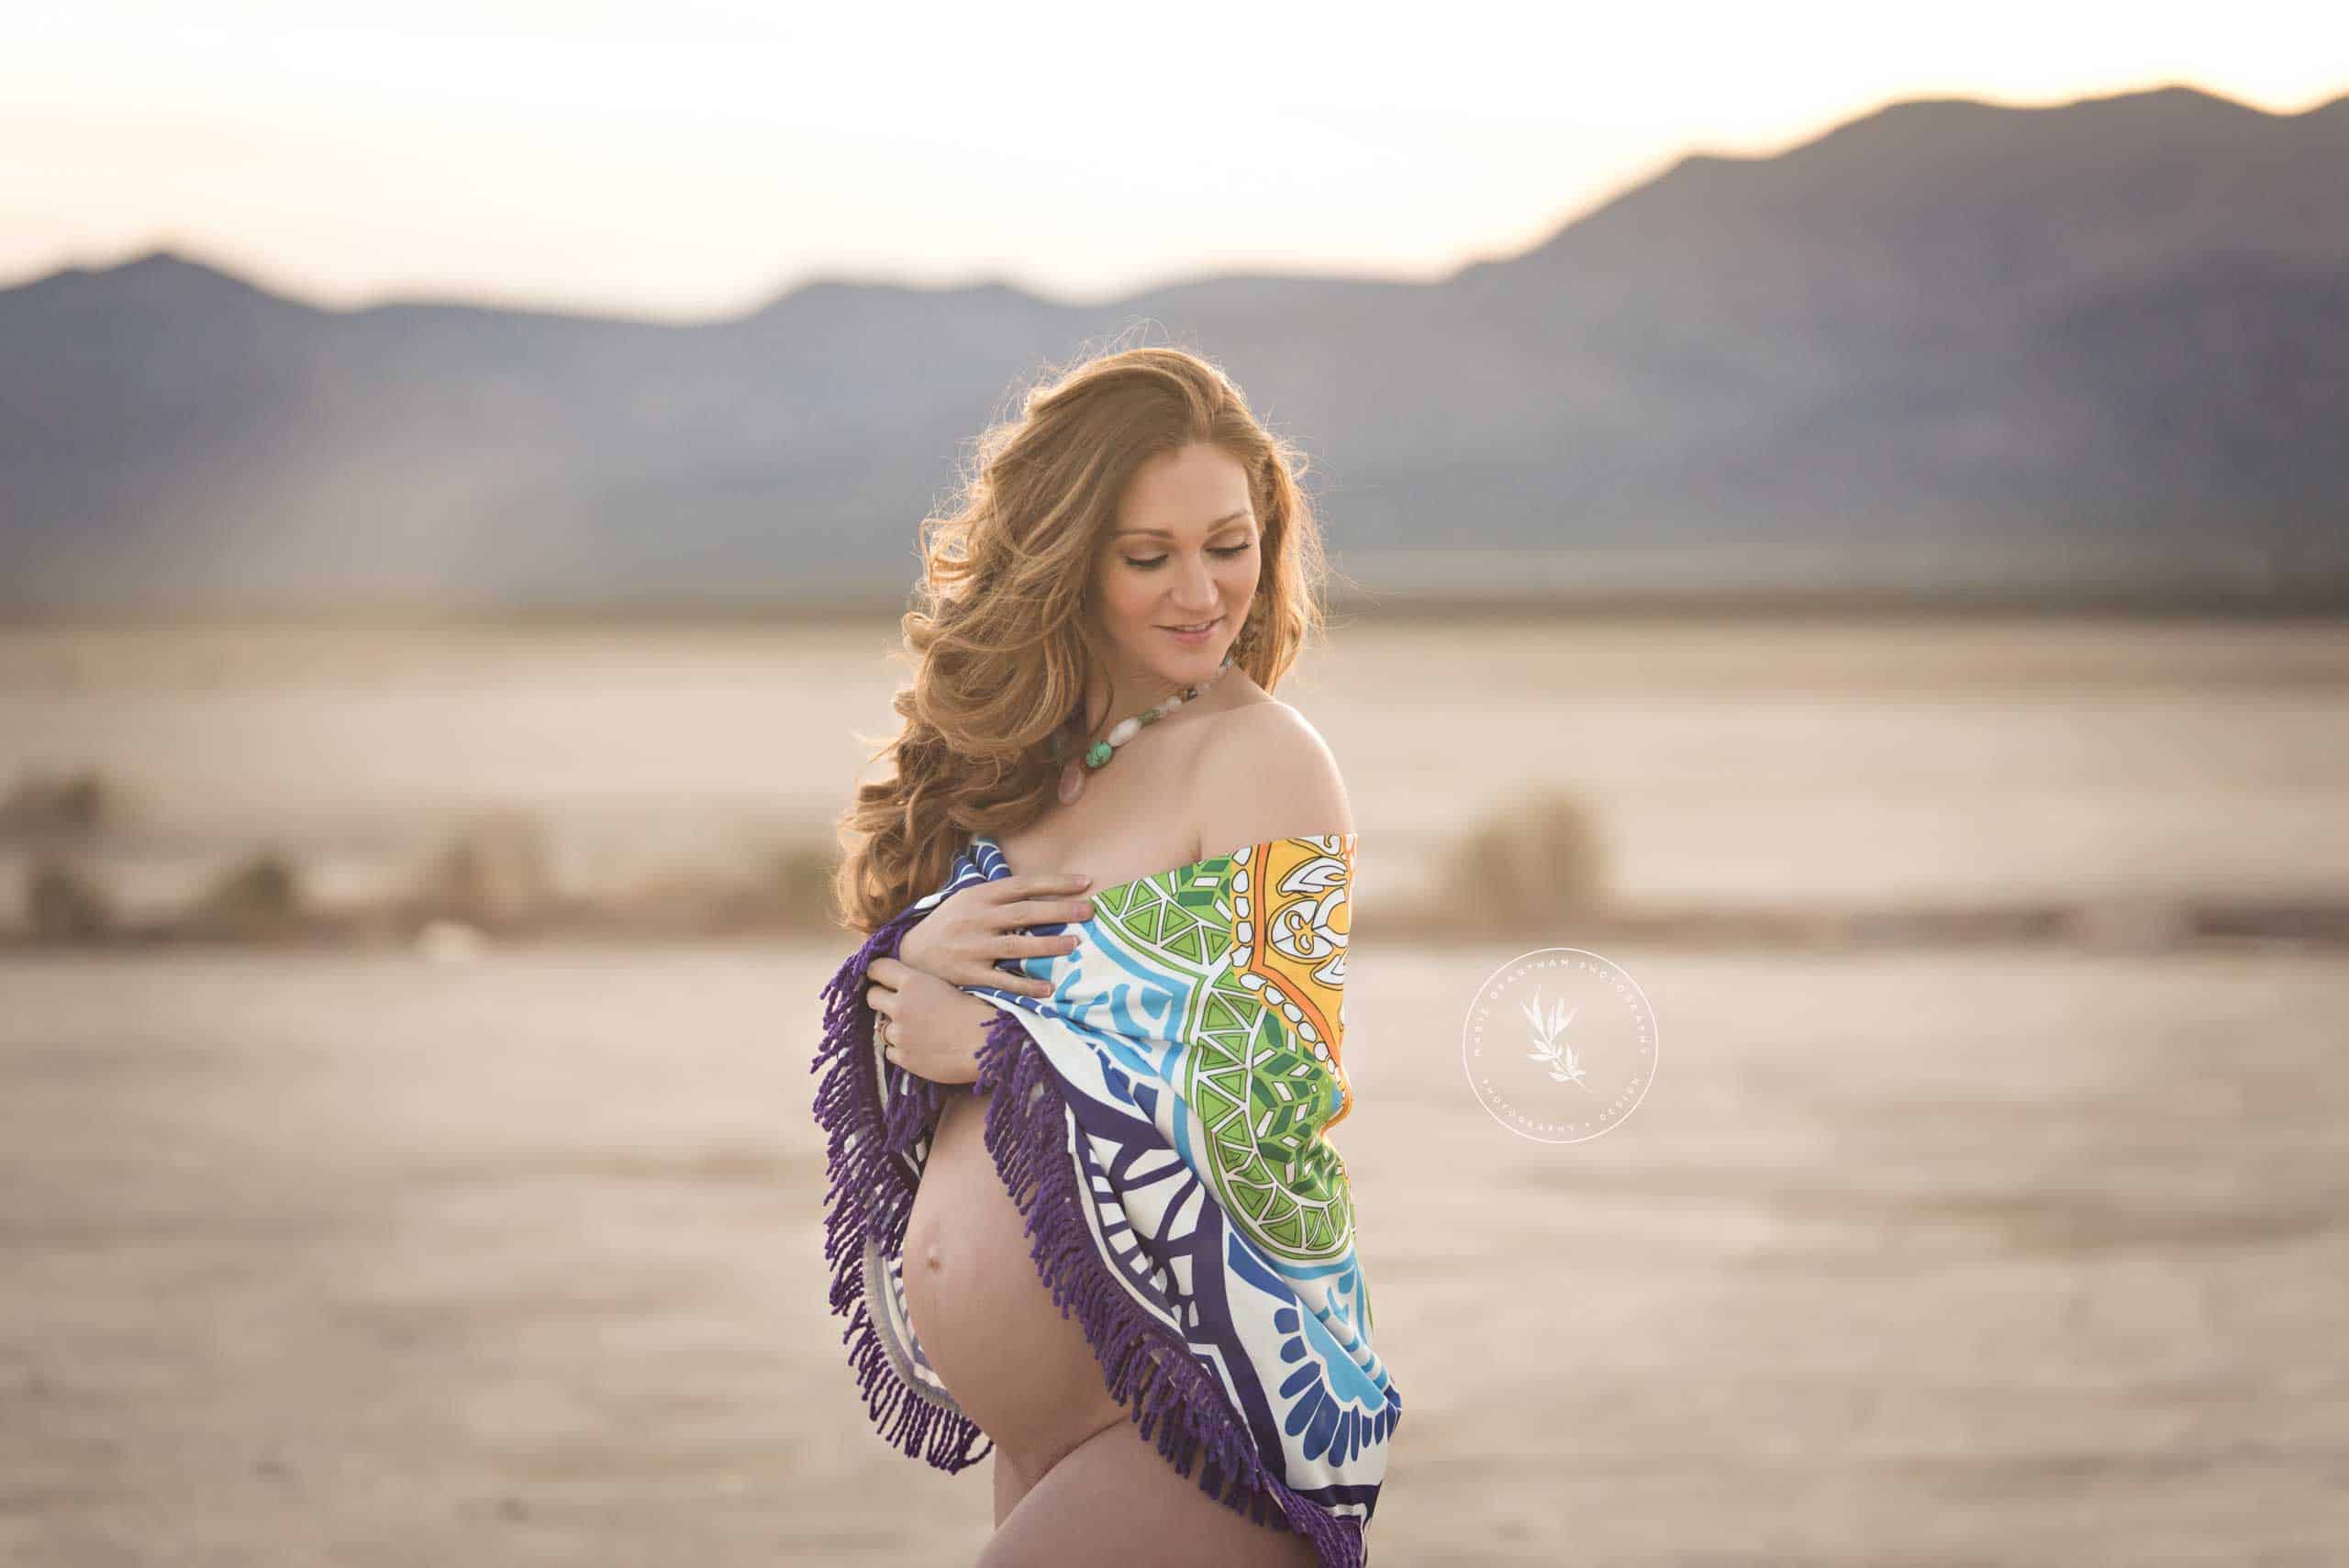 marie_grantham_Photography_maternity_photographer_Las_Vegas_nude_maternity_dry_lake_bed